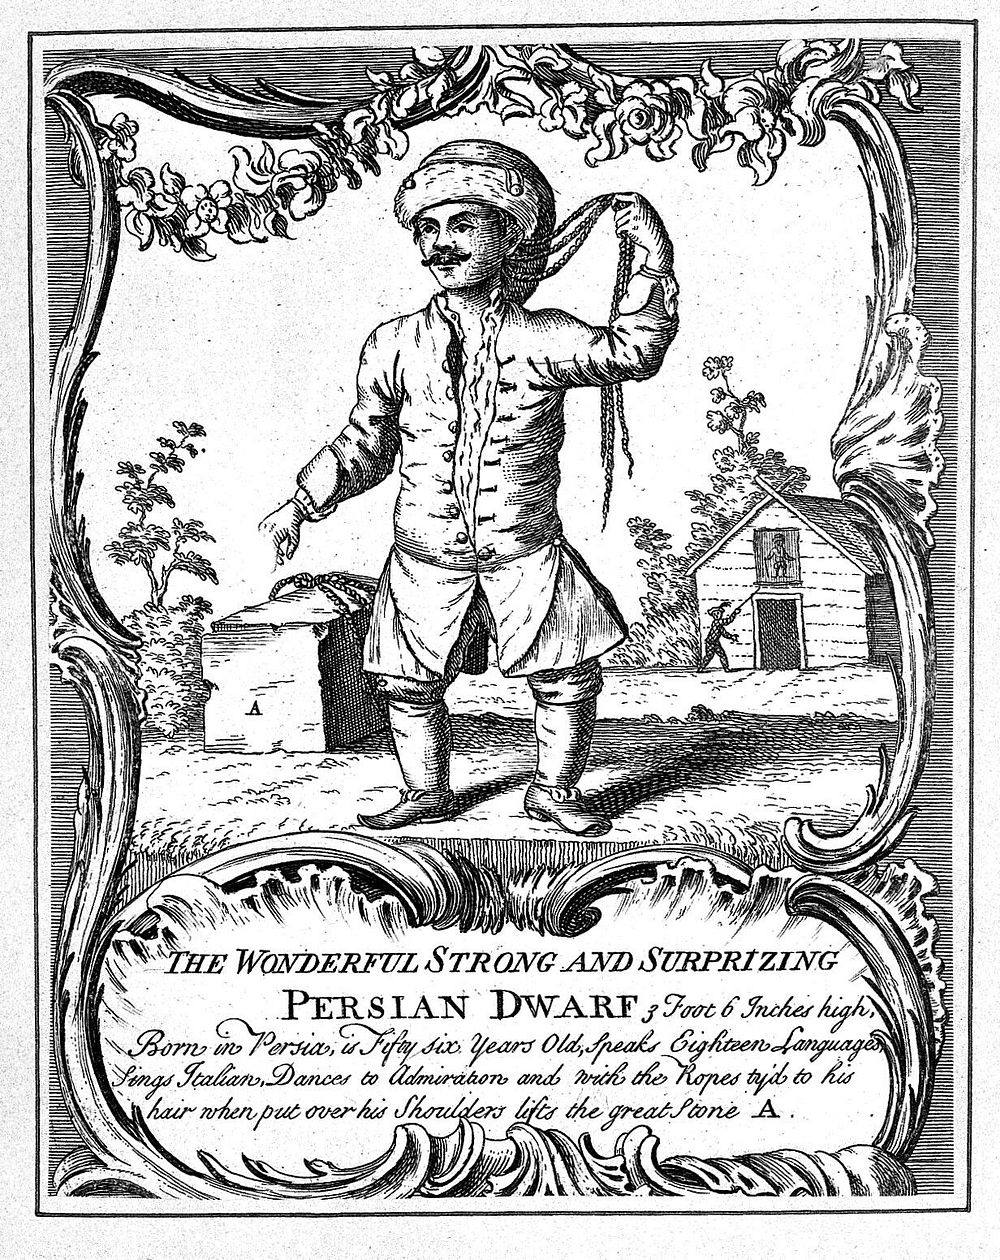 A male dwarf said to be Persian and to possess unusual talents. Etching, ca. 1740.